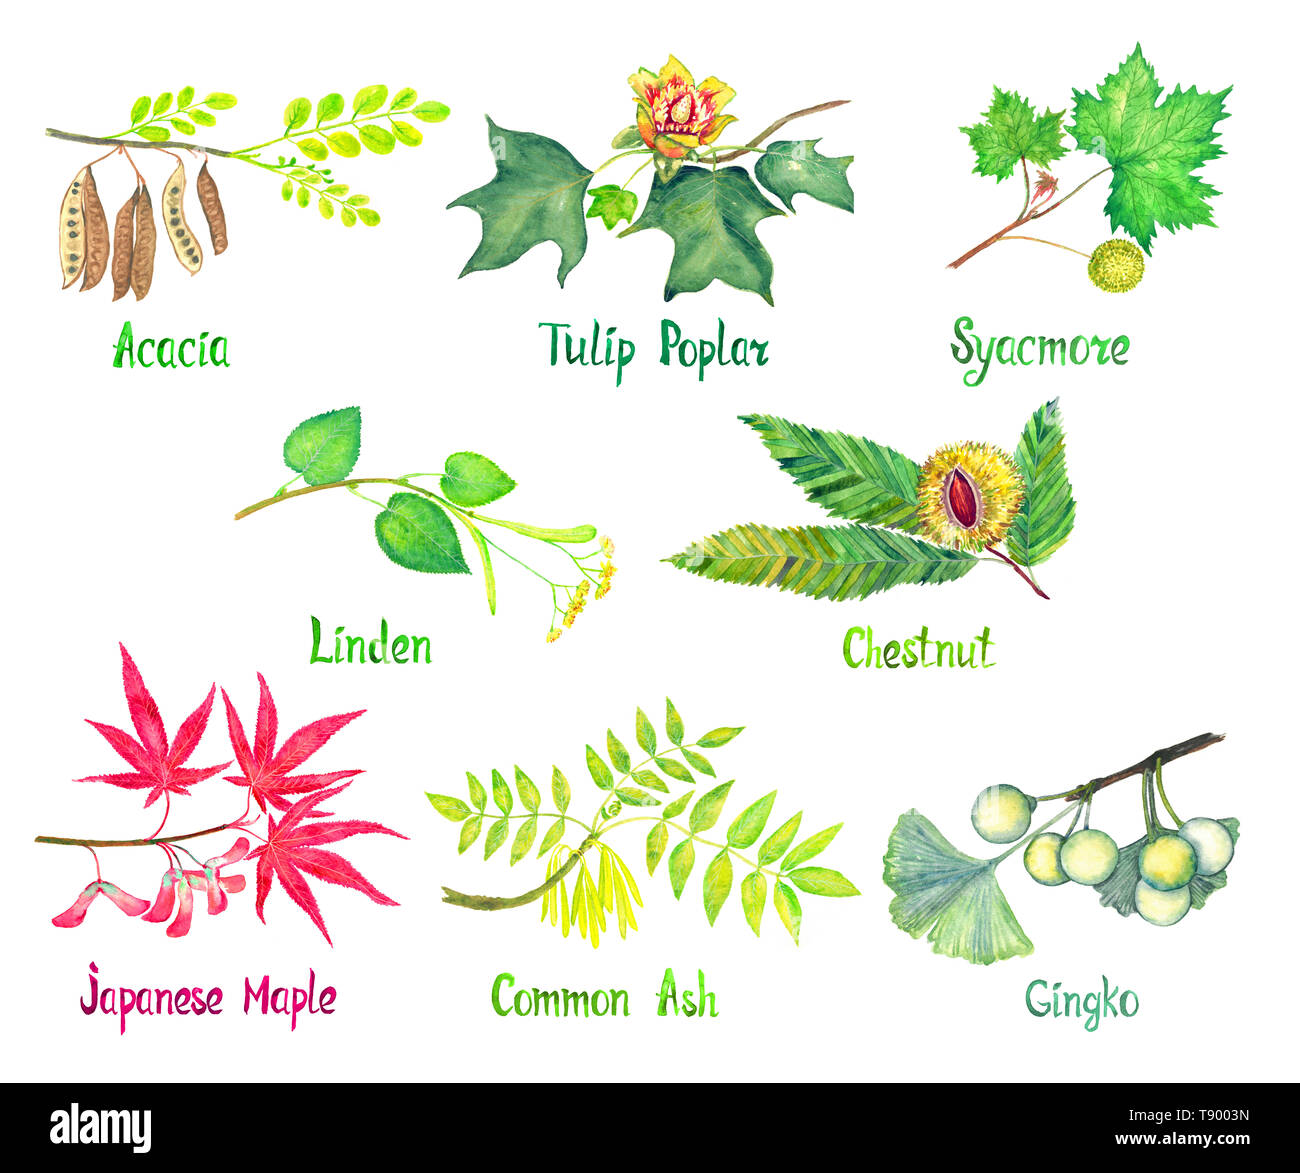 Acacia, Tulip poplar, Sycamore, Linden, Chestnut, Japanese Maple, Common Ash, Gingko branch with green leaves and seeds (nuts) or flowers, watercolor  Stock Photo